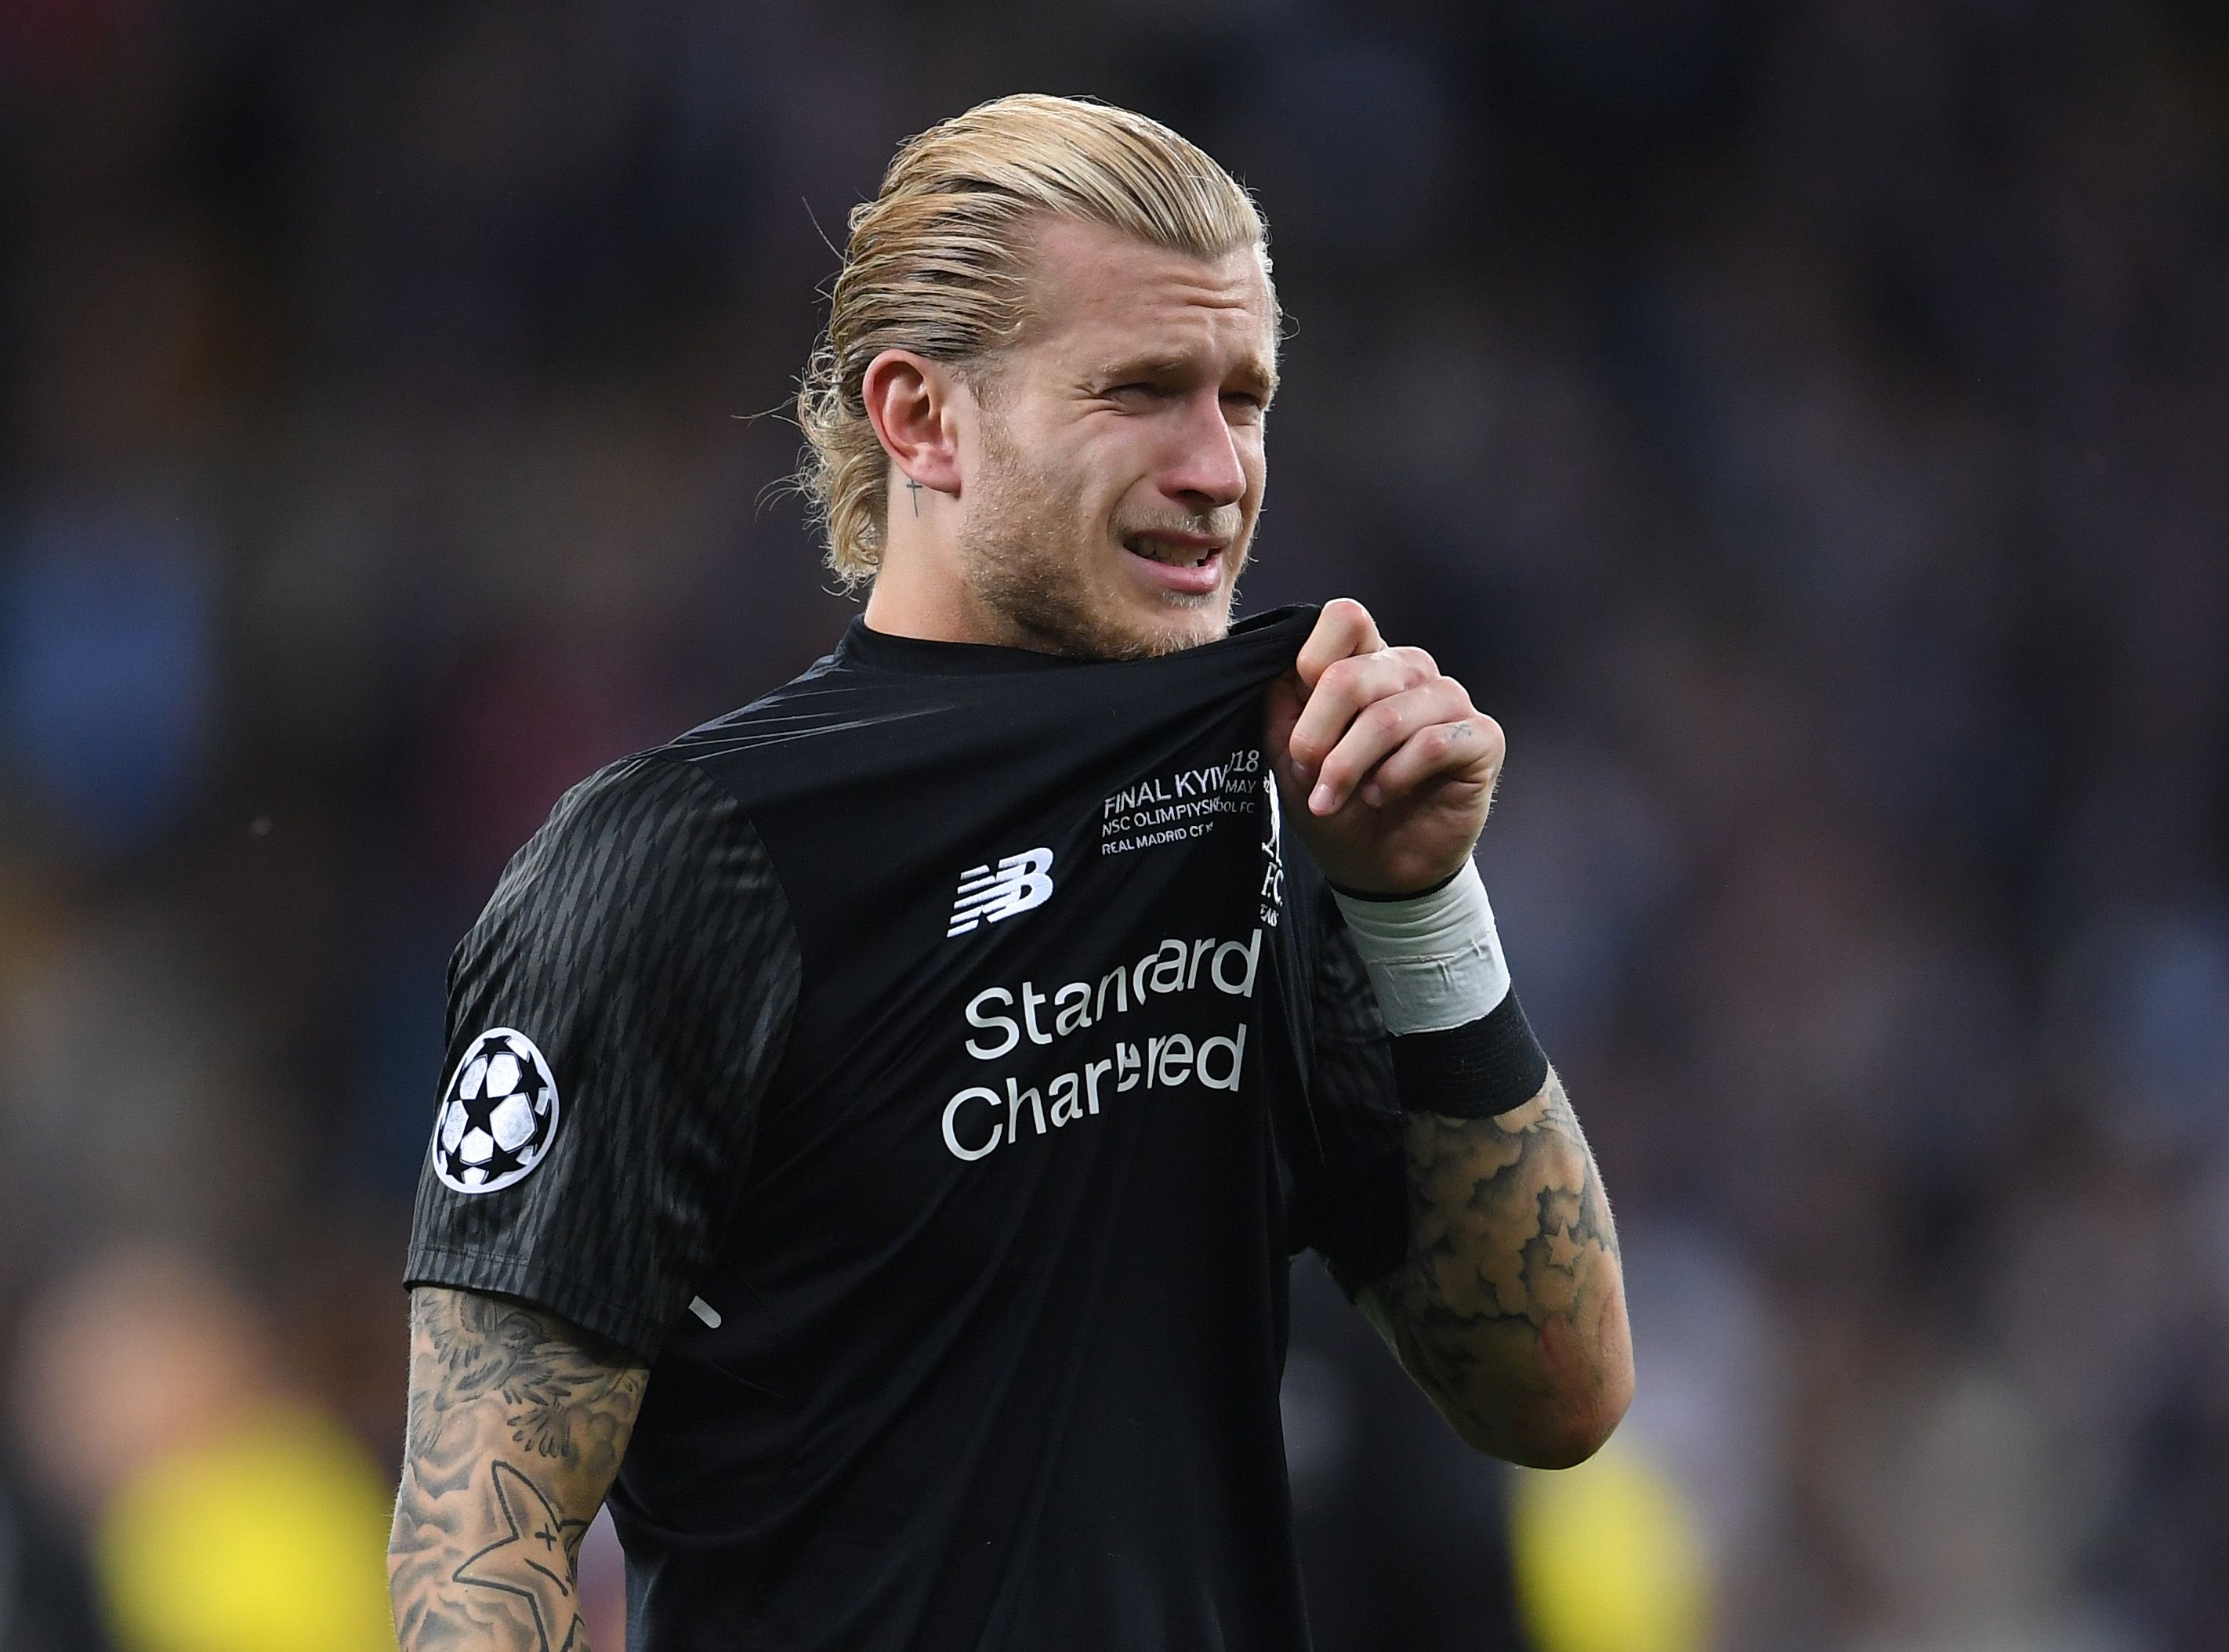 The moment Liverpool players gave up on Loris Karius has been revealed | SportsJOE.ie